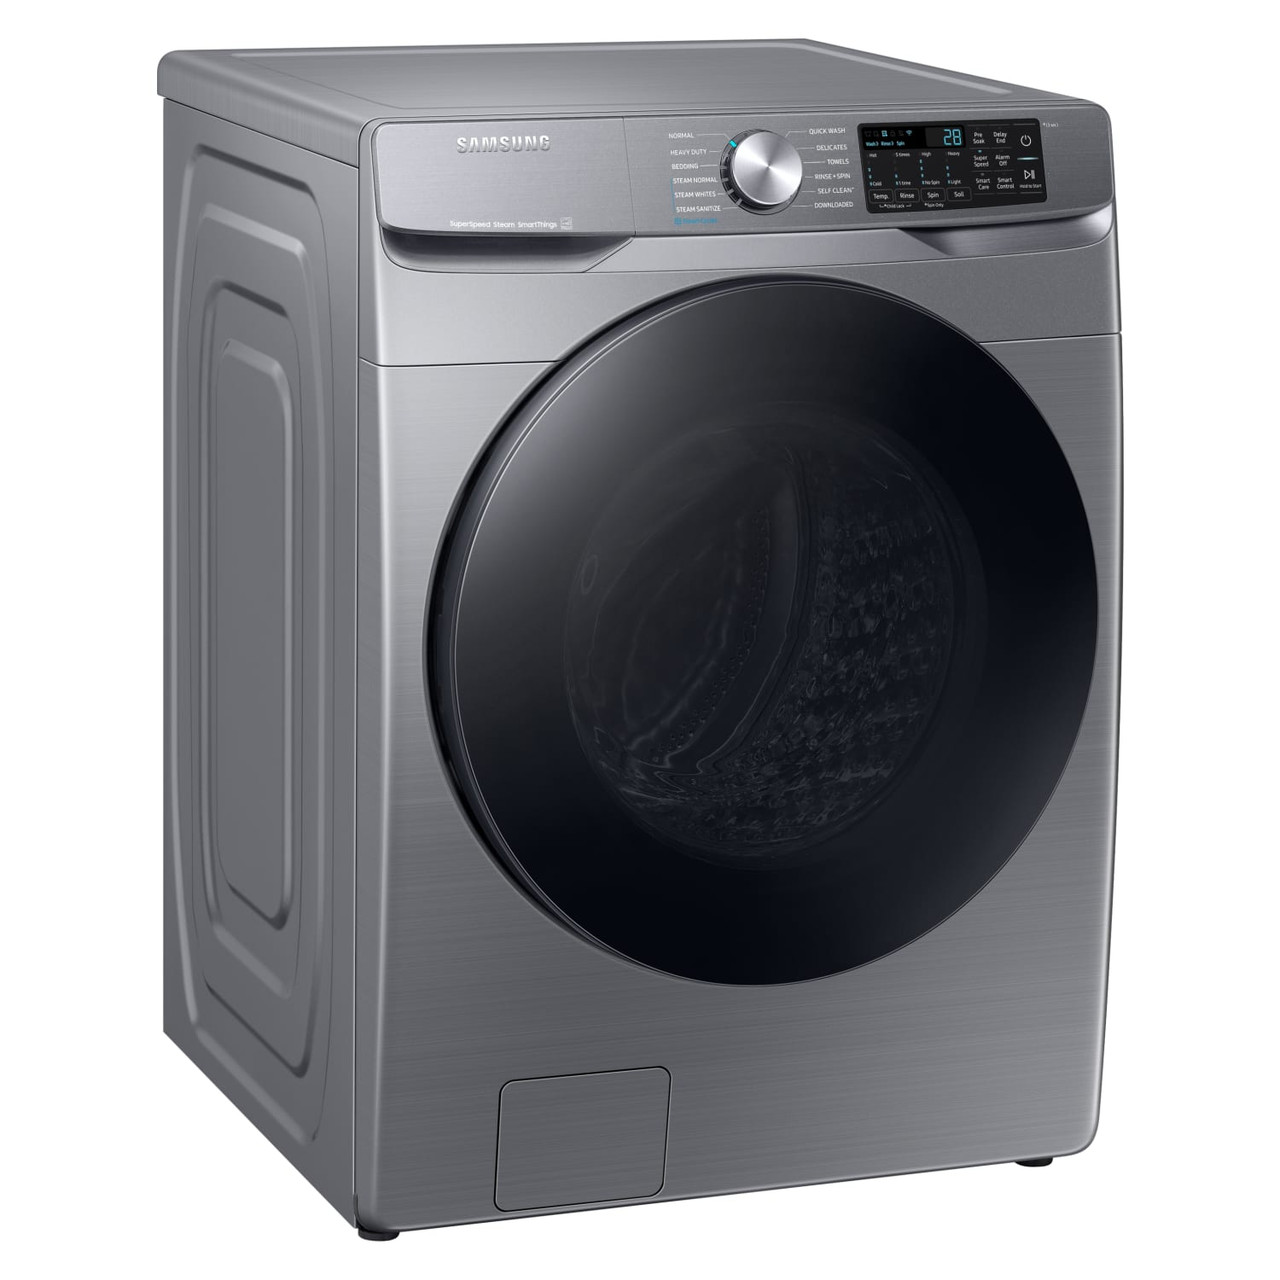 Samsung 4.5 Cu. Ft. Front Load Washer with Super Speed Wash in Platinum - WF45B6300AP